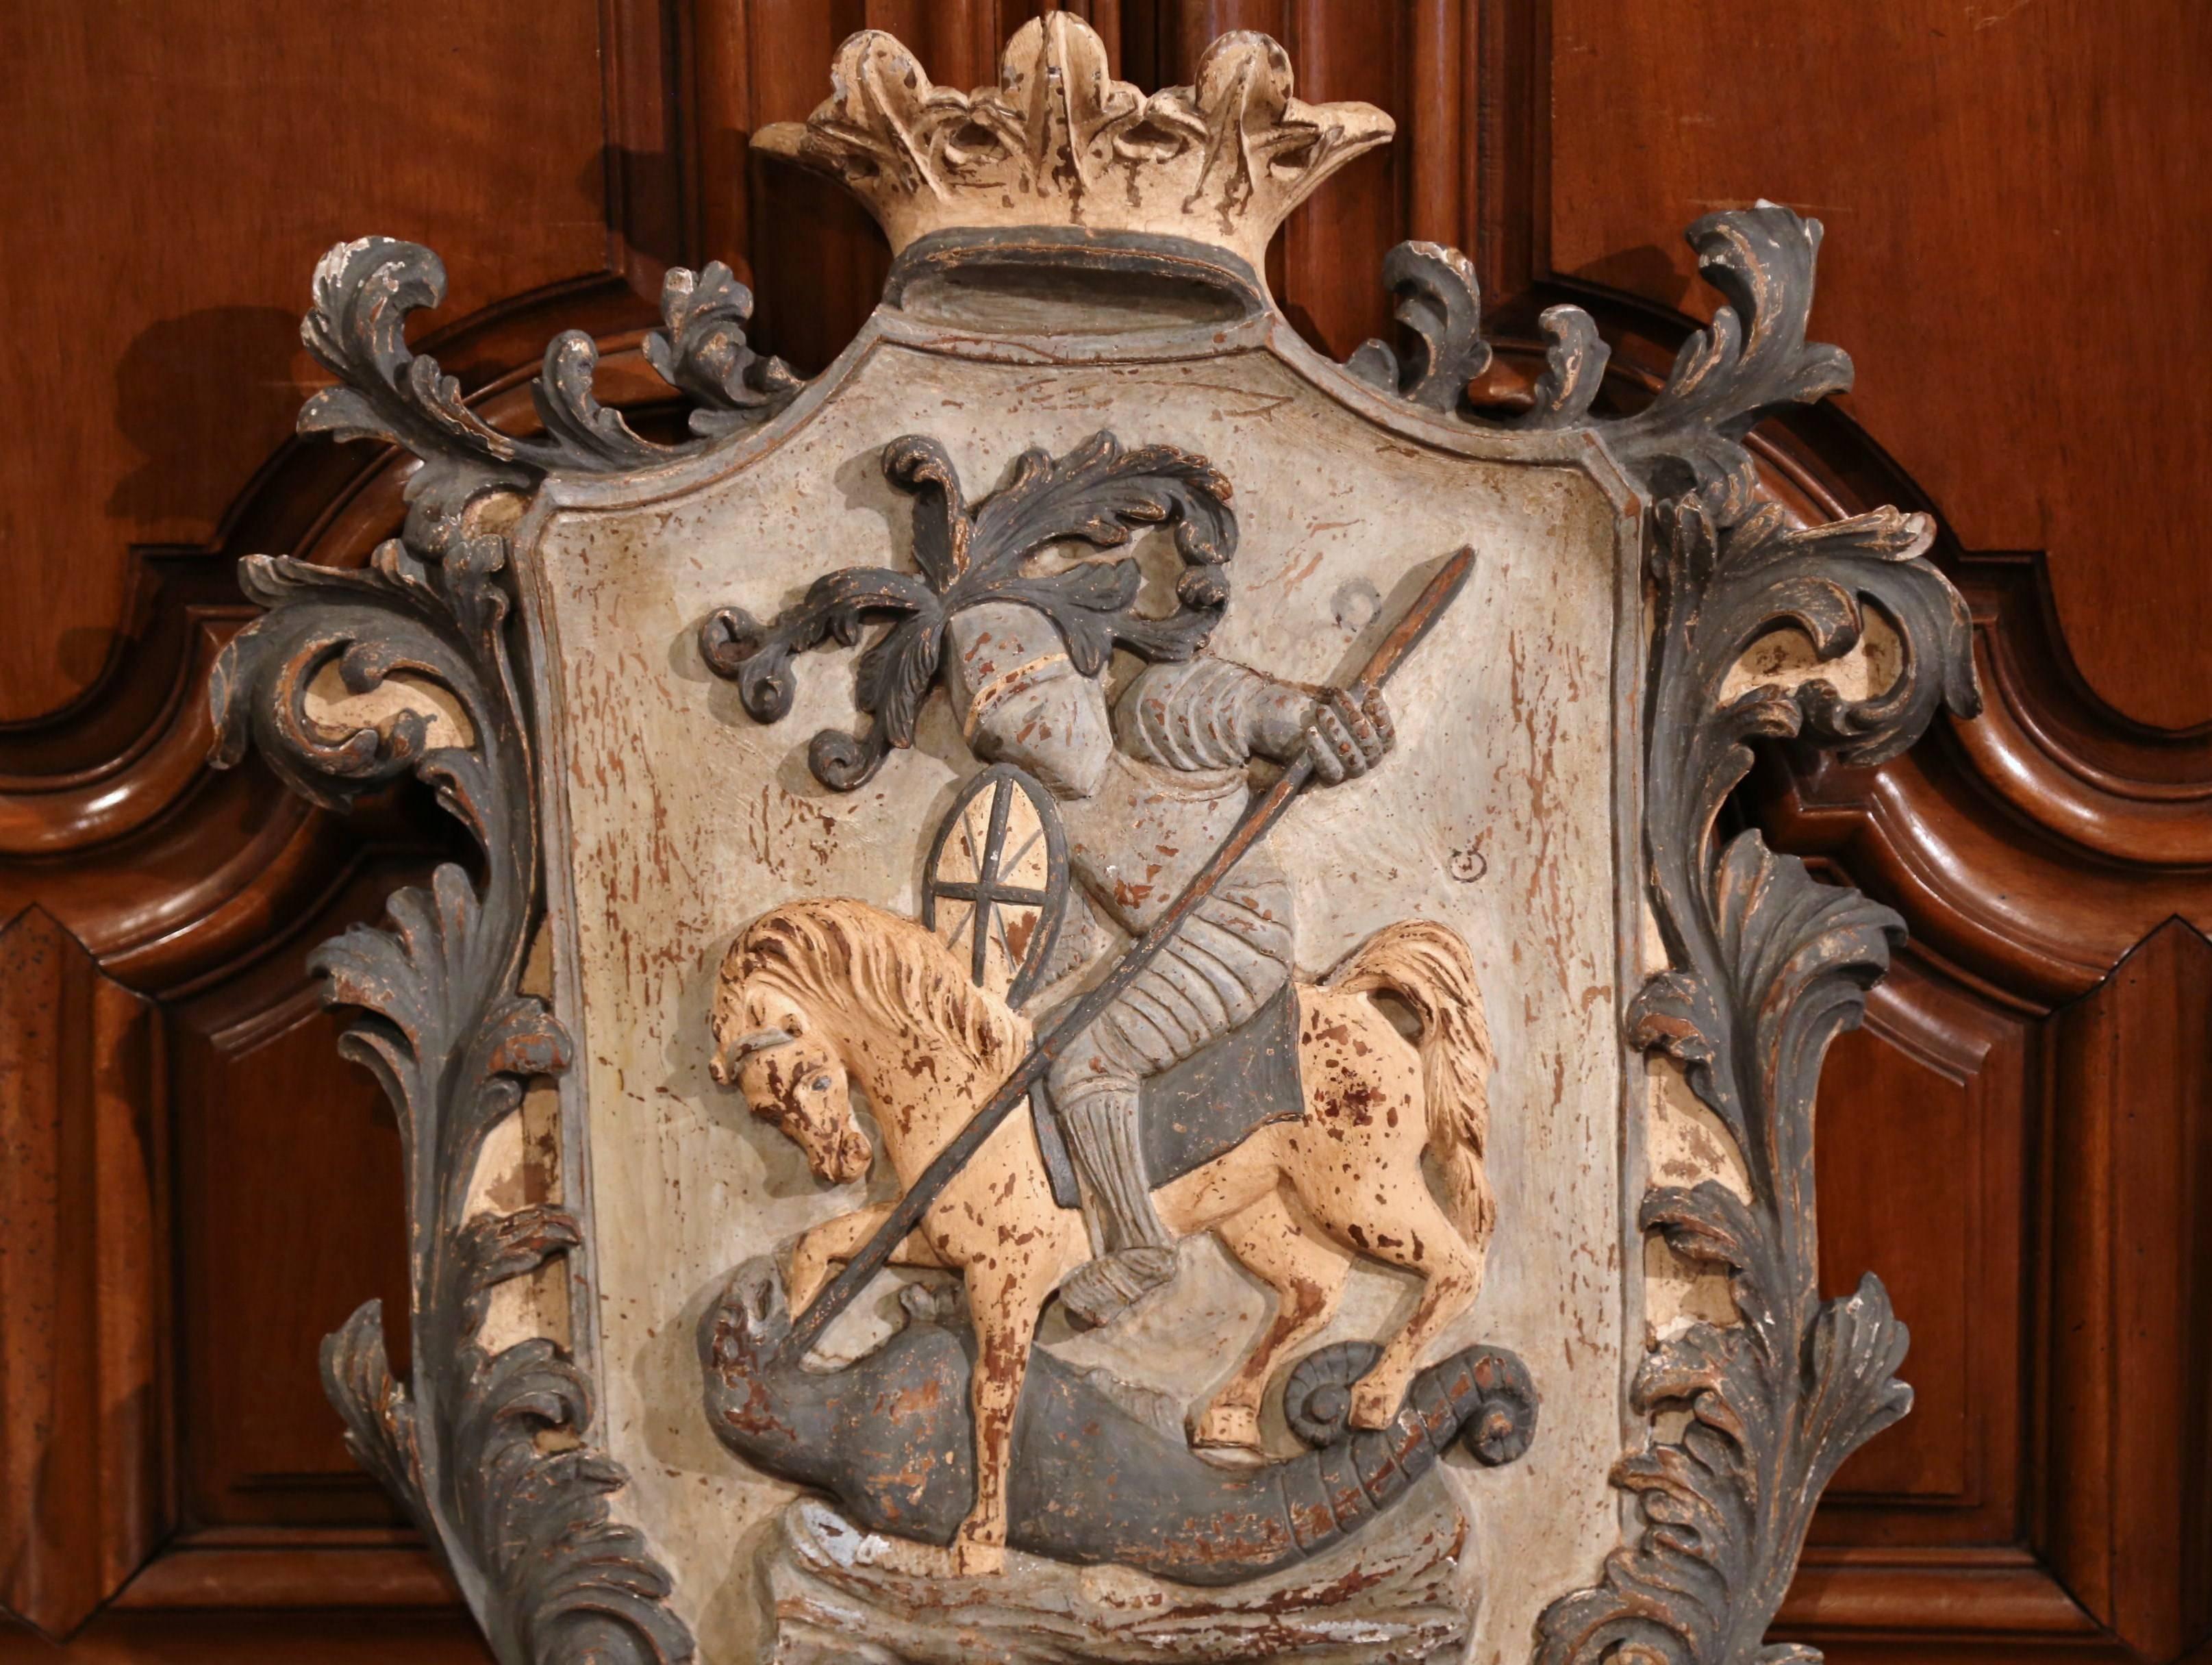 Embellish your wall with this large antique, medieval crest. Hand-carved in France, circa 1920, the traditional, painted shield has a crown at the pediment with decorative foliage motifs on both sides. The centre part features a warrior in full